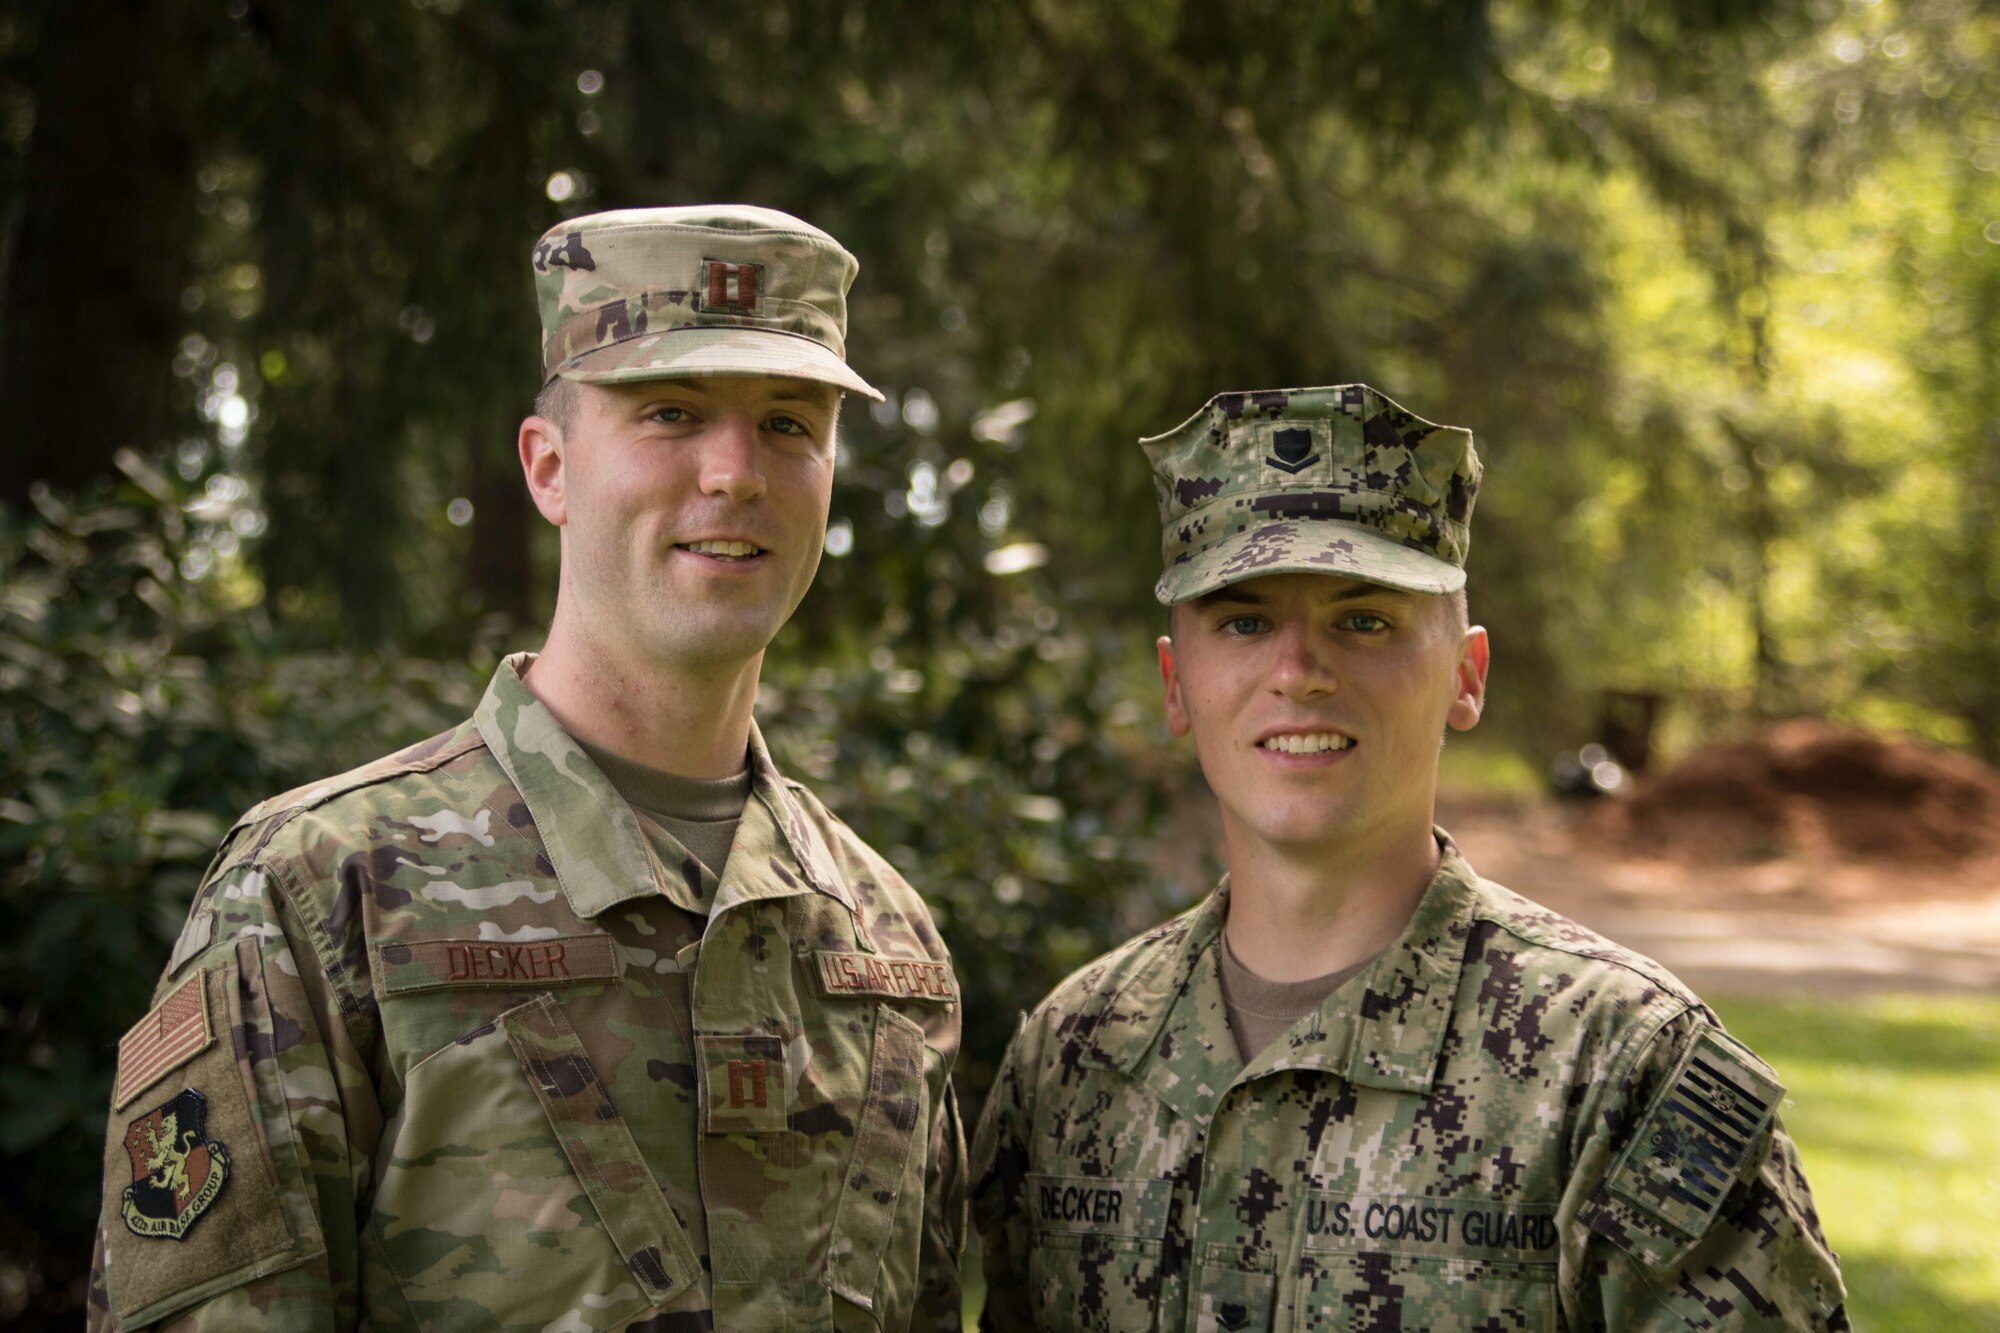 U.S. Air Force Capt. Hans Decker, 501st Combat Support Wing chaplain, poses for a photo with his brother, a U.S. Coast Guard reservist and a civilian sheriff's deputy in Oregon. (Courtesy photo)